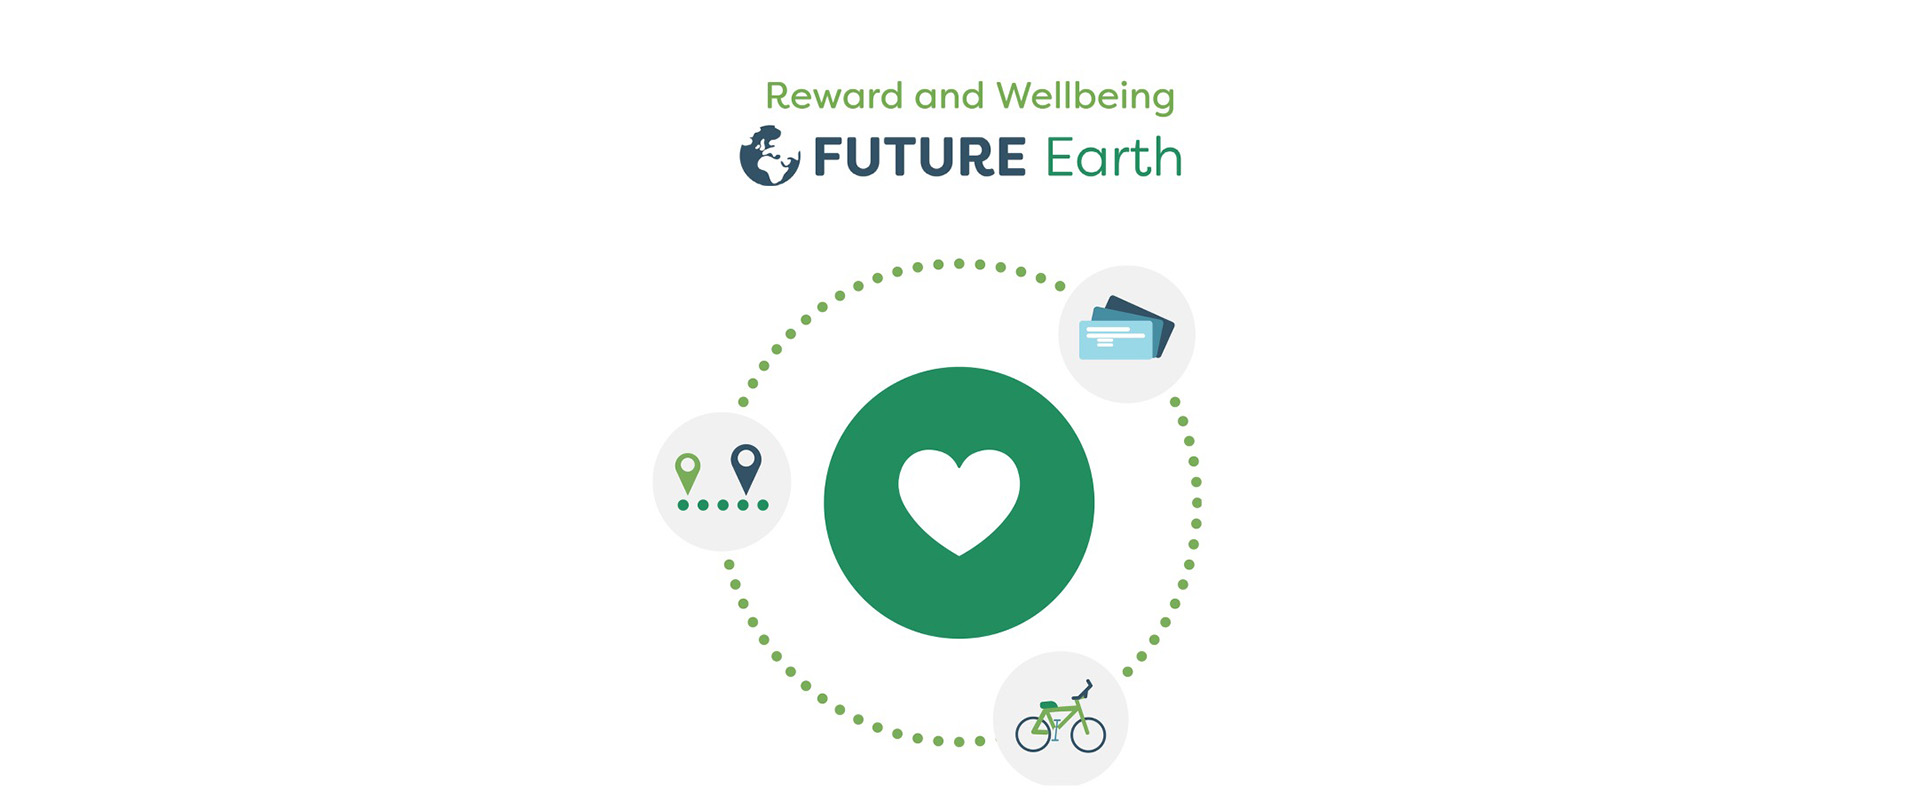 Future Earth - Reward and Wellbeing